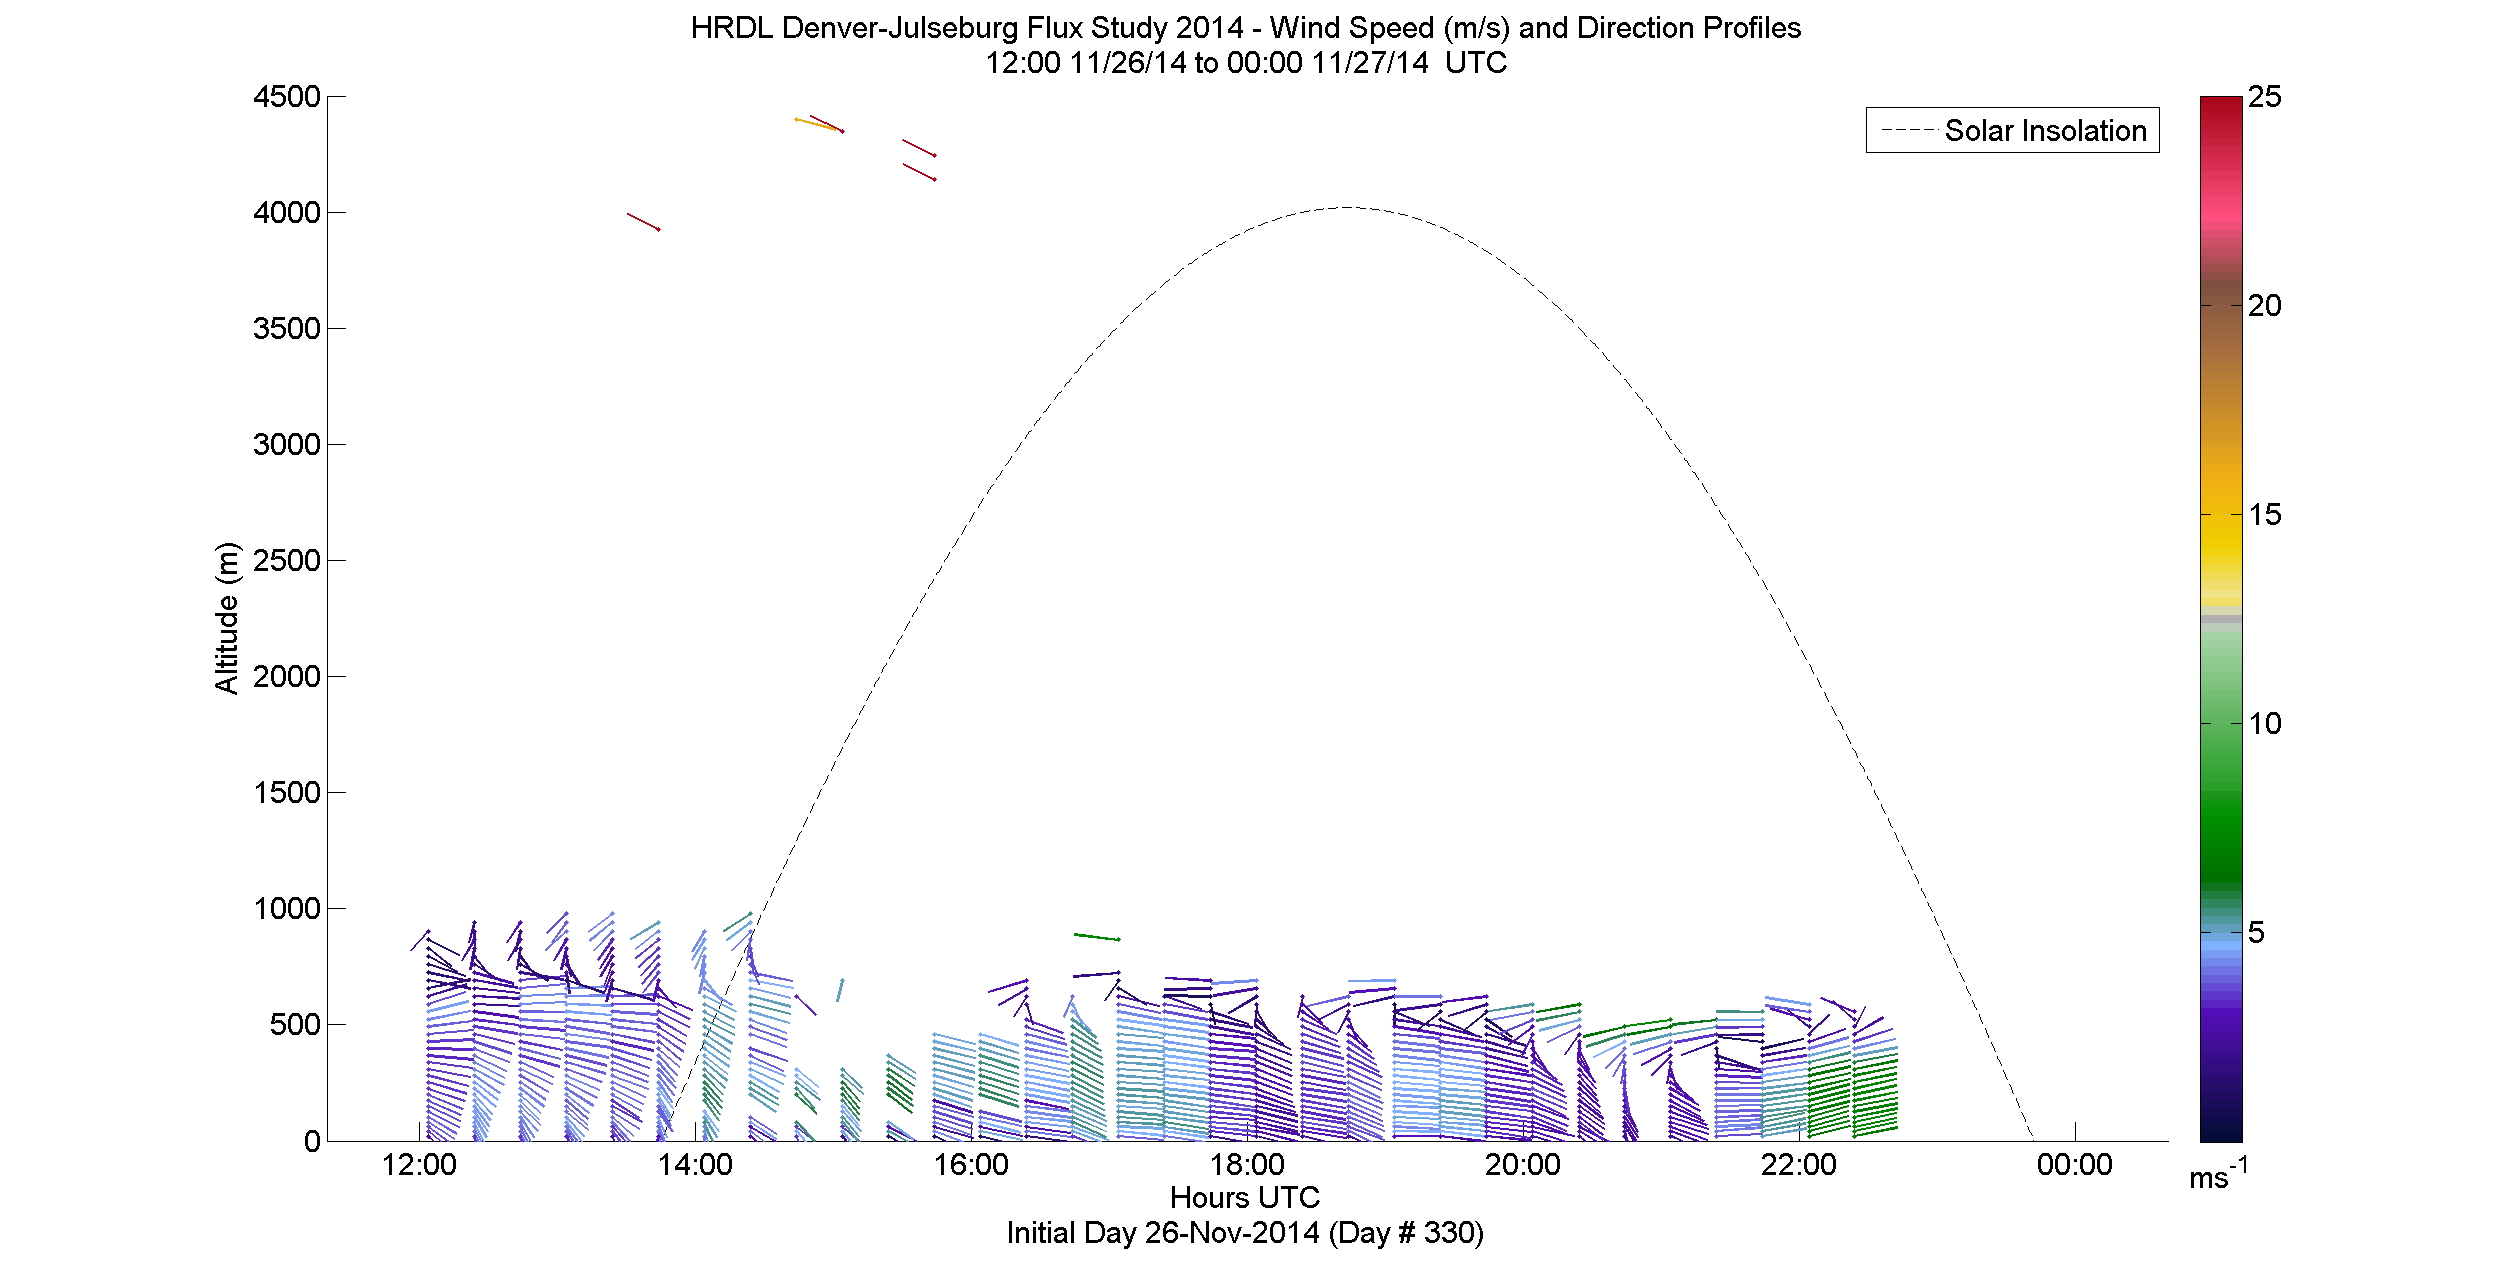 HRDL speed and direction profile - November 26 pm